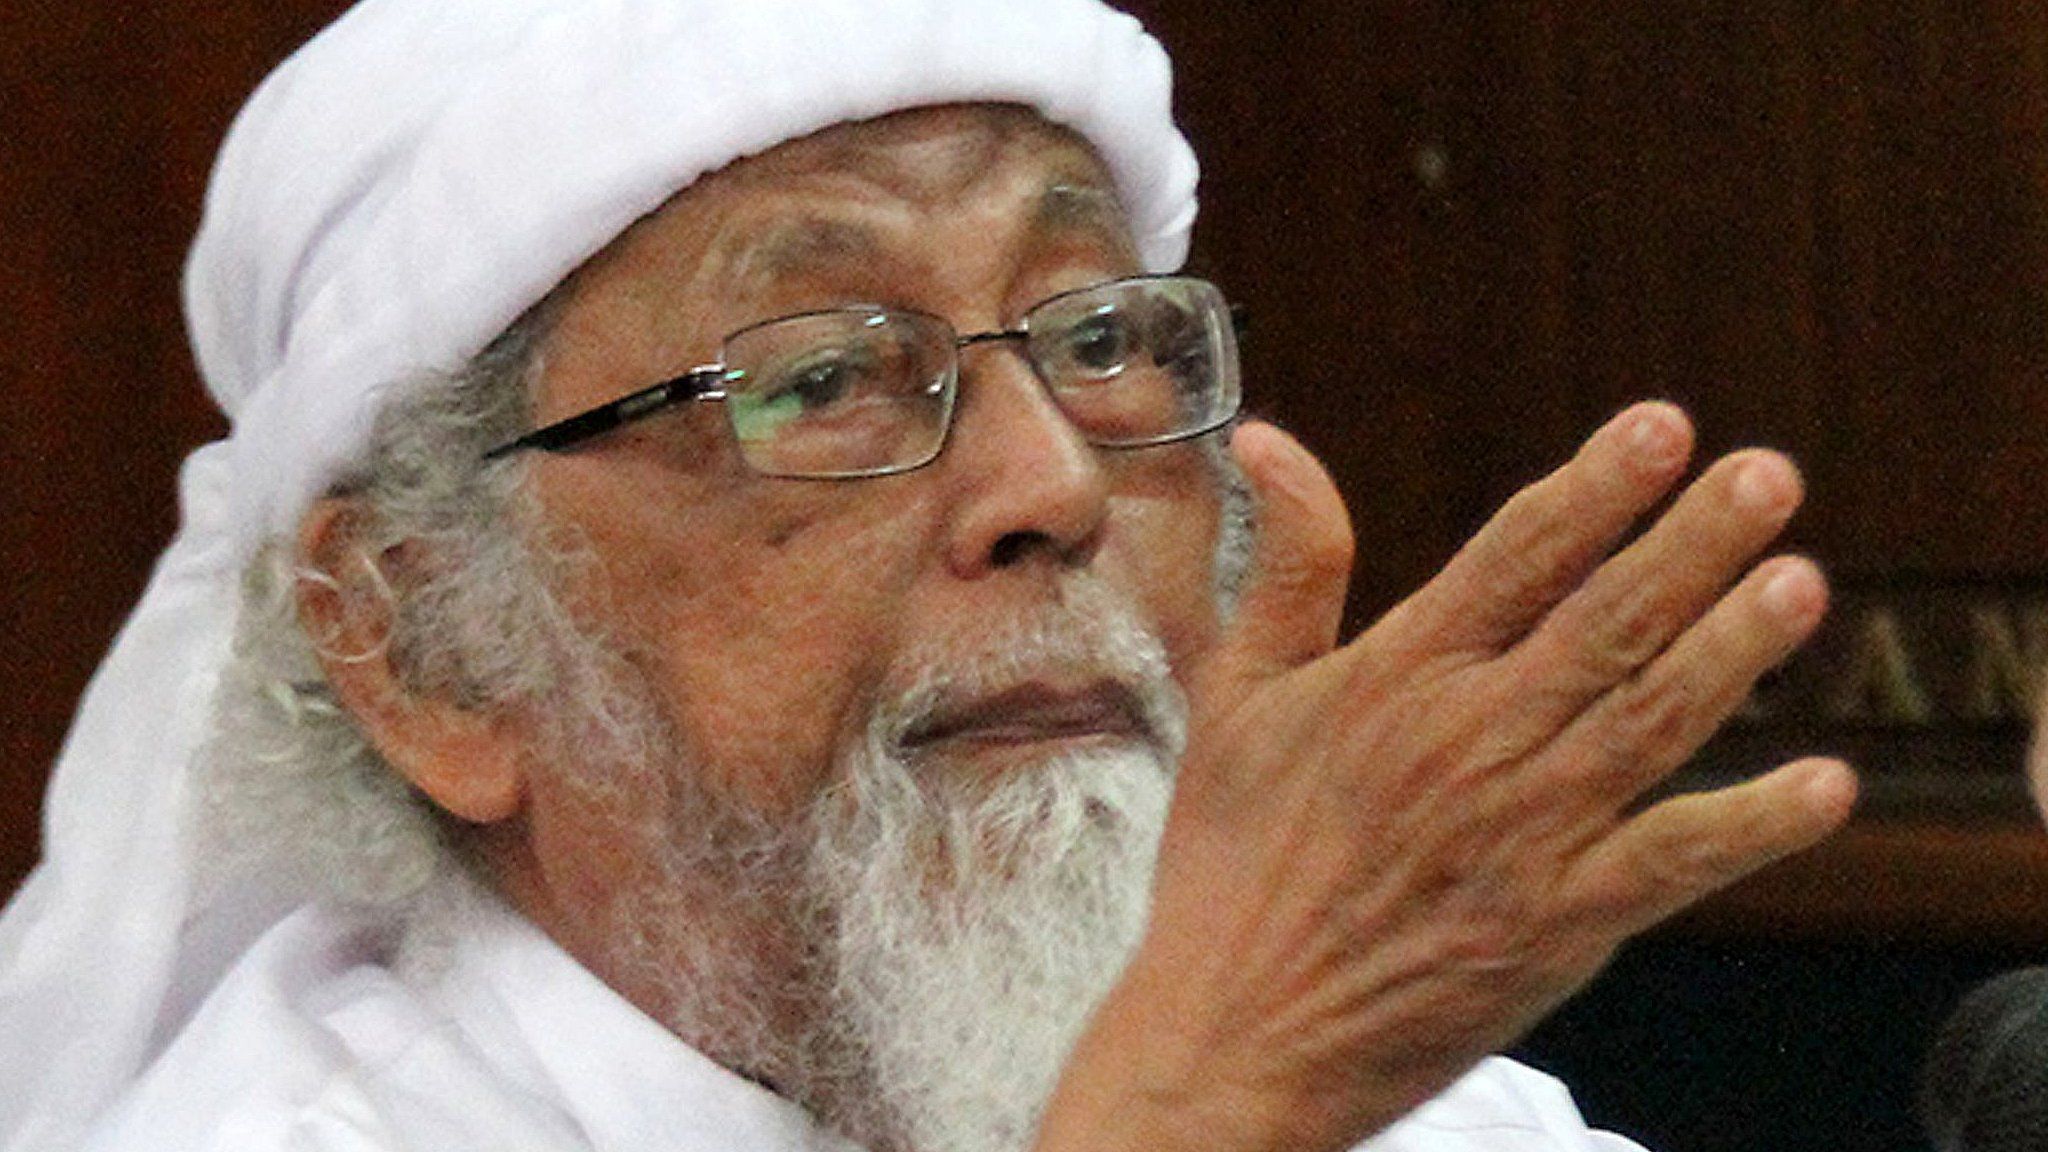 File photo taken on February 9, 2016 shows jailed Indonesian cleric Abu Bakar Ba'asyir gesturing during a court appearance in Cilacap, Central Java